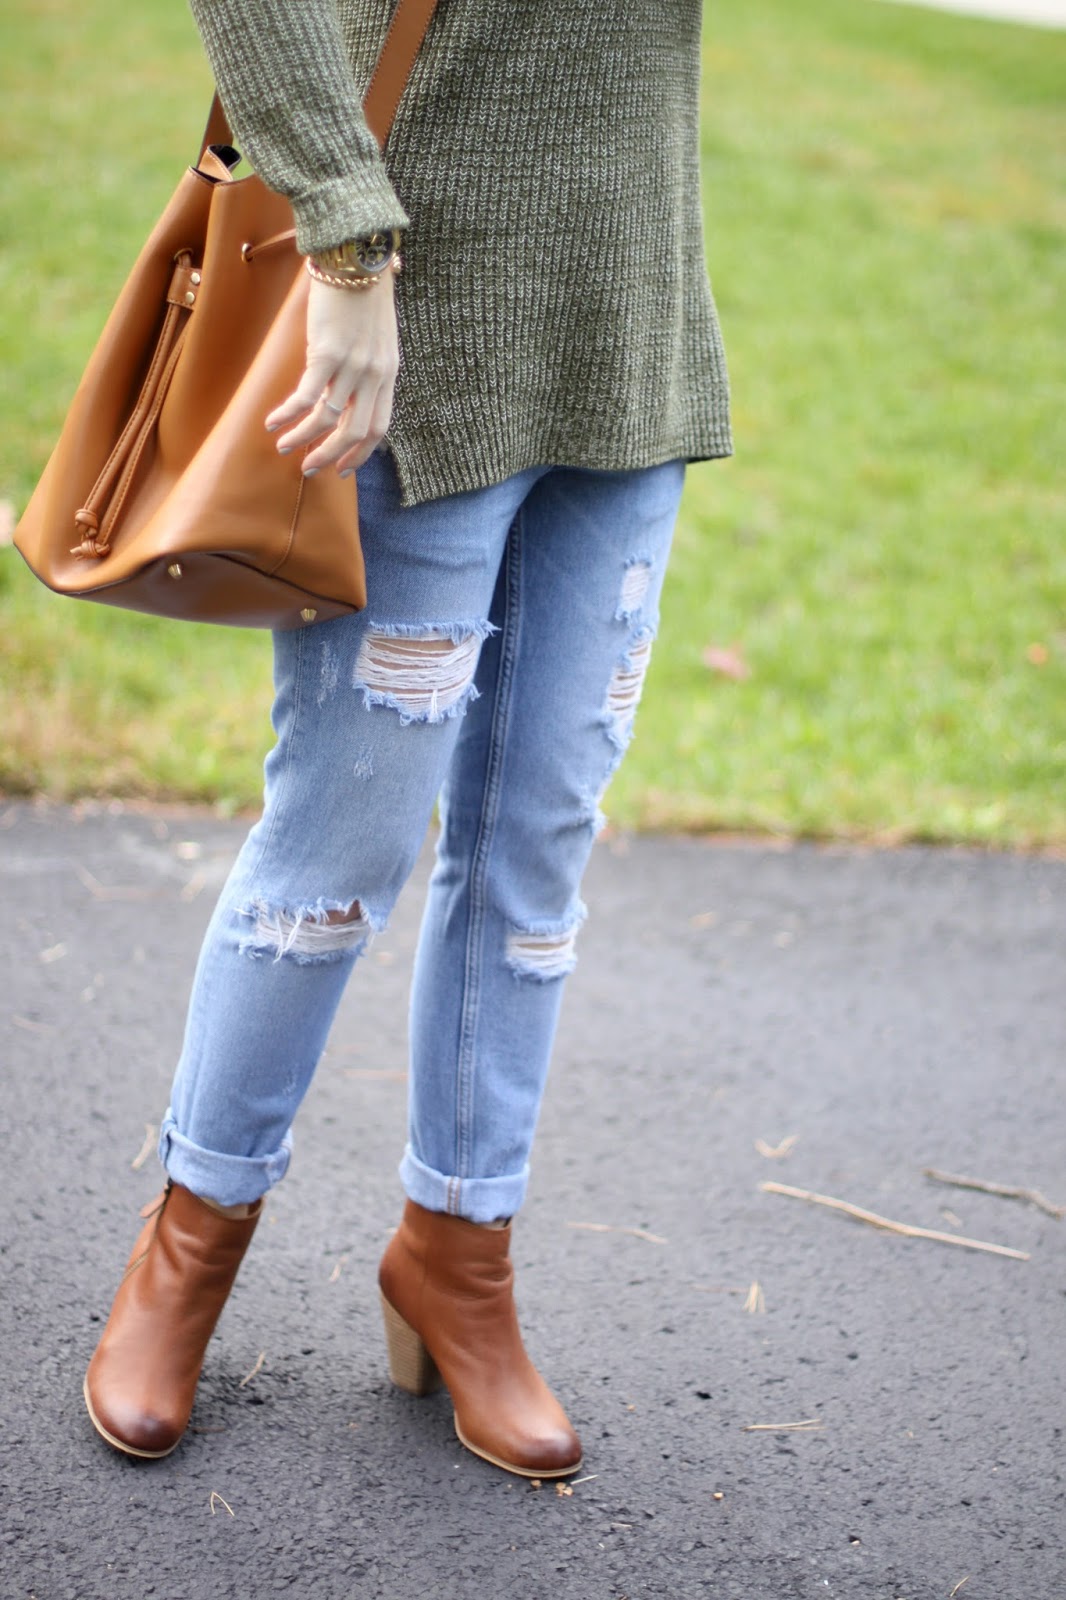 Shopping Bags and Travel Bags: Boyfriend Jeans